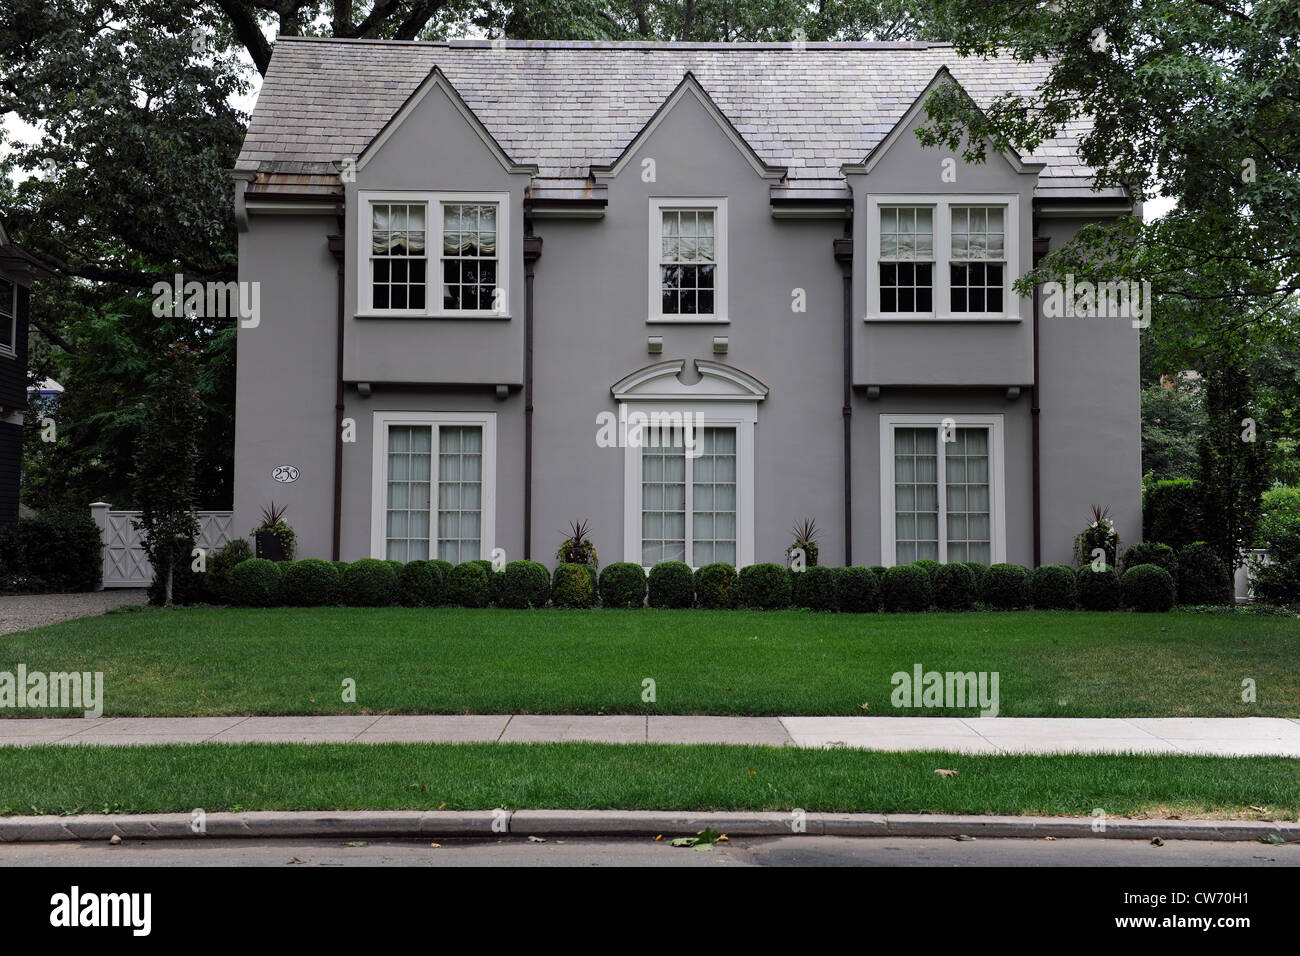 Stucco house with green lawn. New Haven, CT. Stock Photo